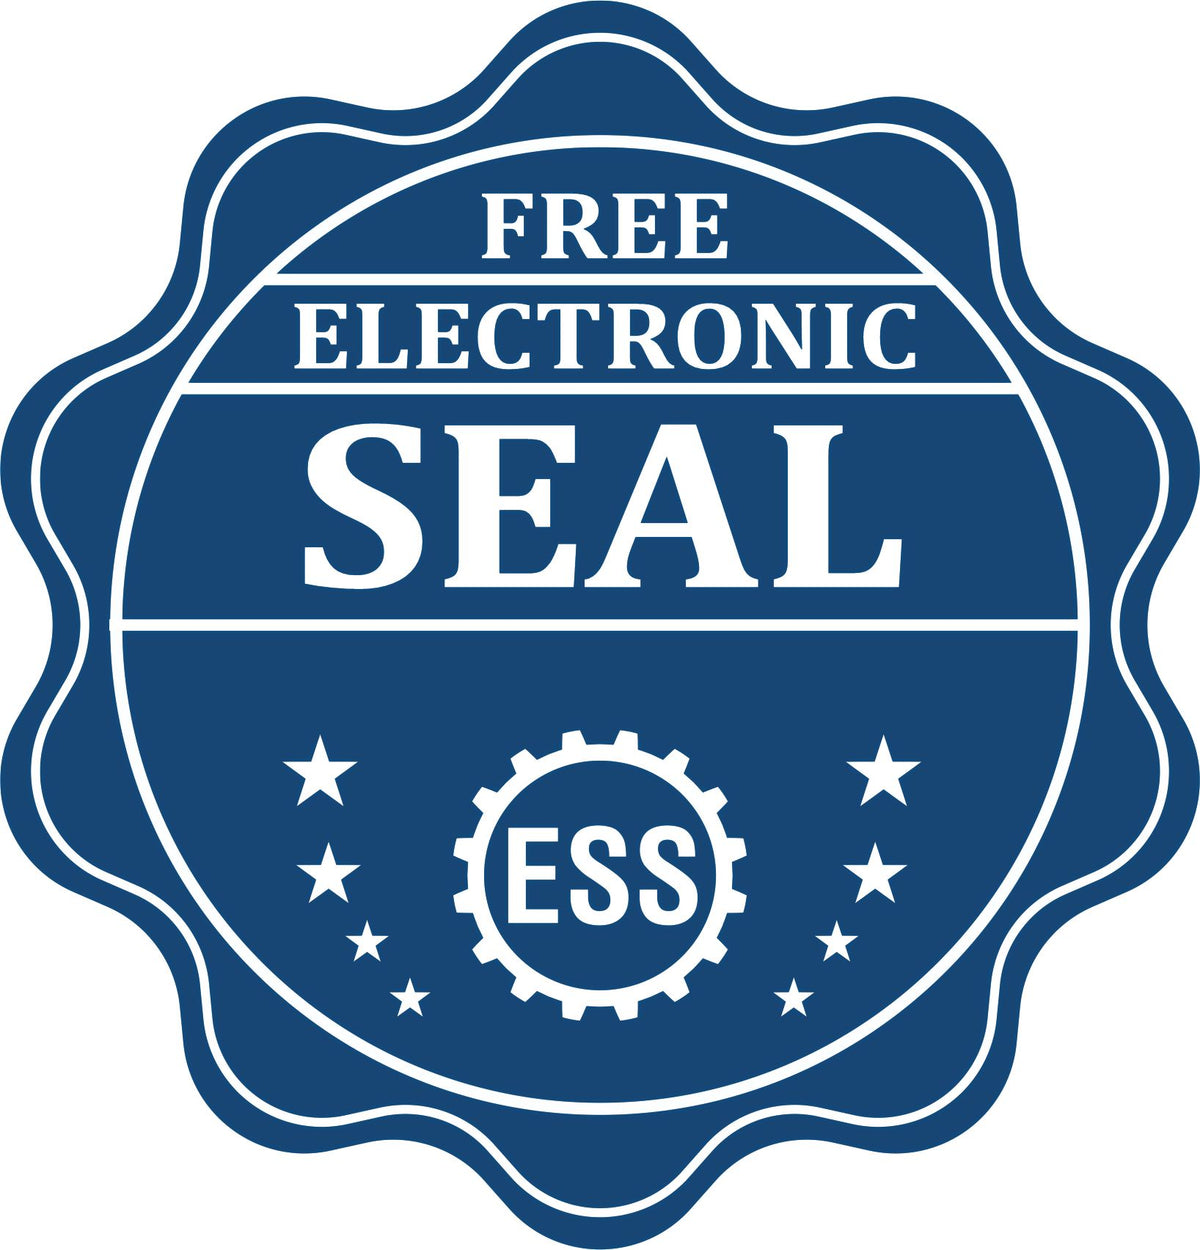 A badge showing a free electronic seal for the PSI West Virginia Notary Stamp with stars and the ESS gear on the emblem.